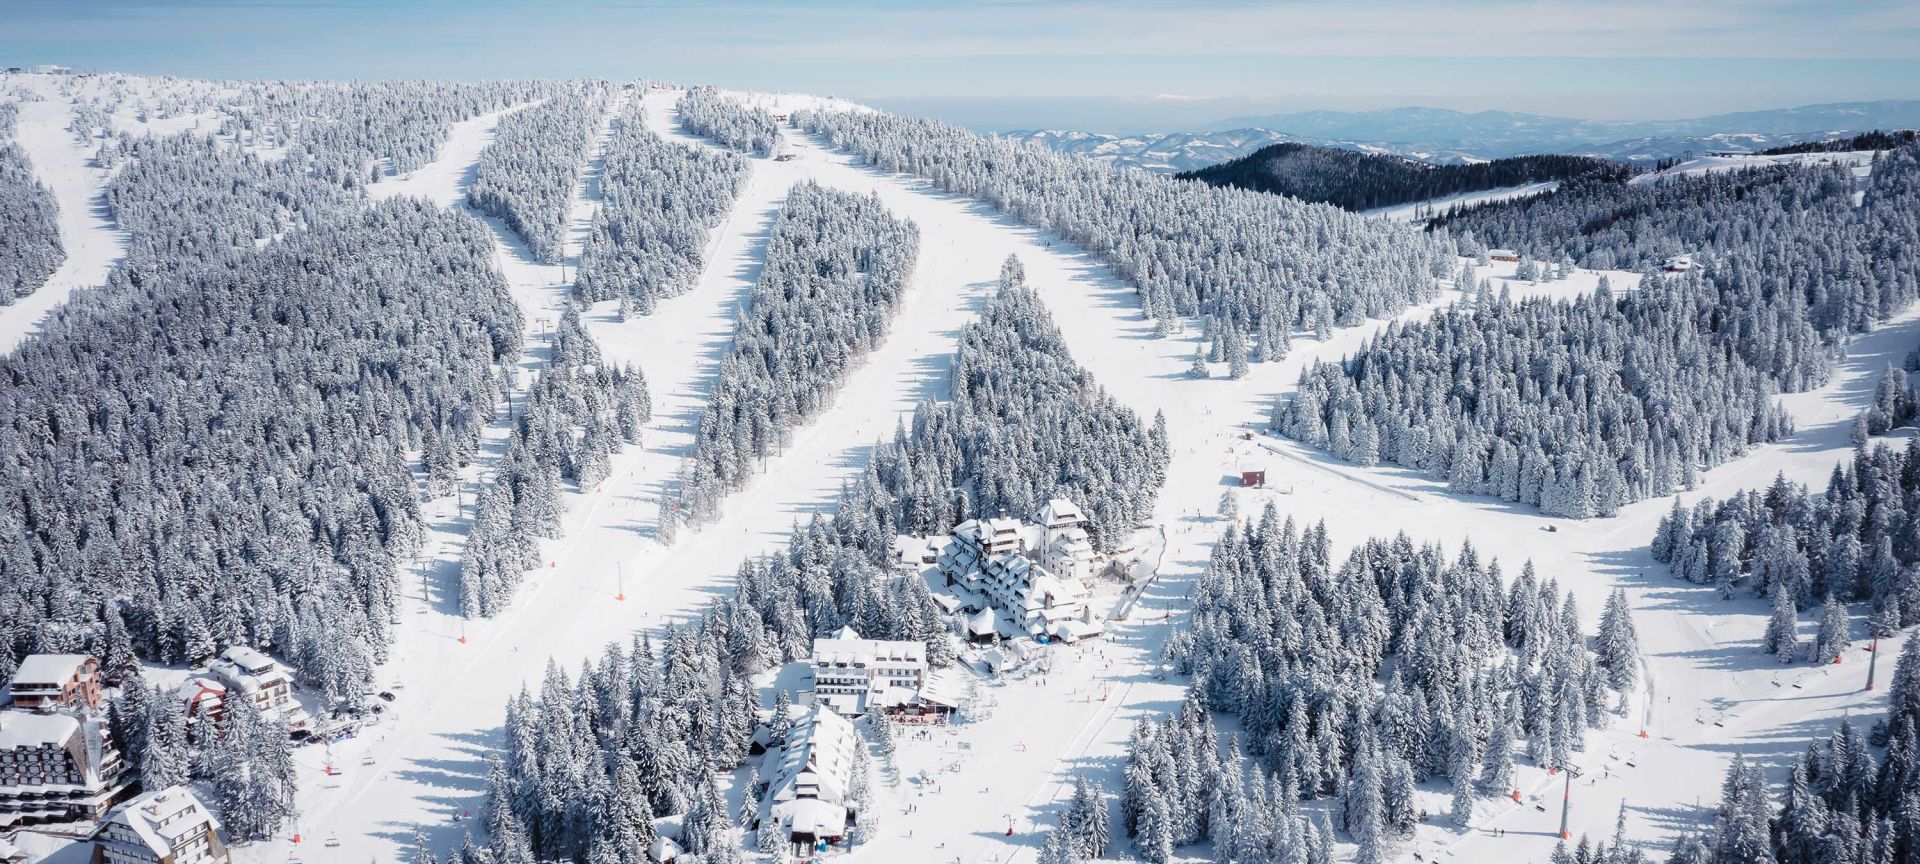 A View Of A Snow Covered Slope